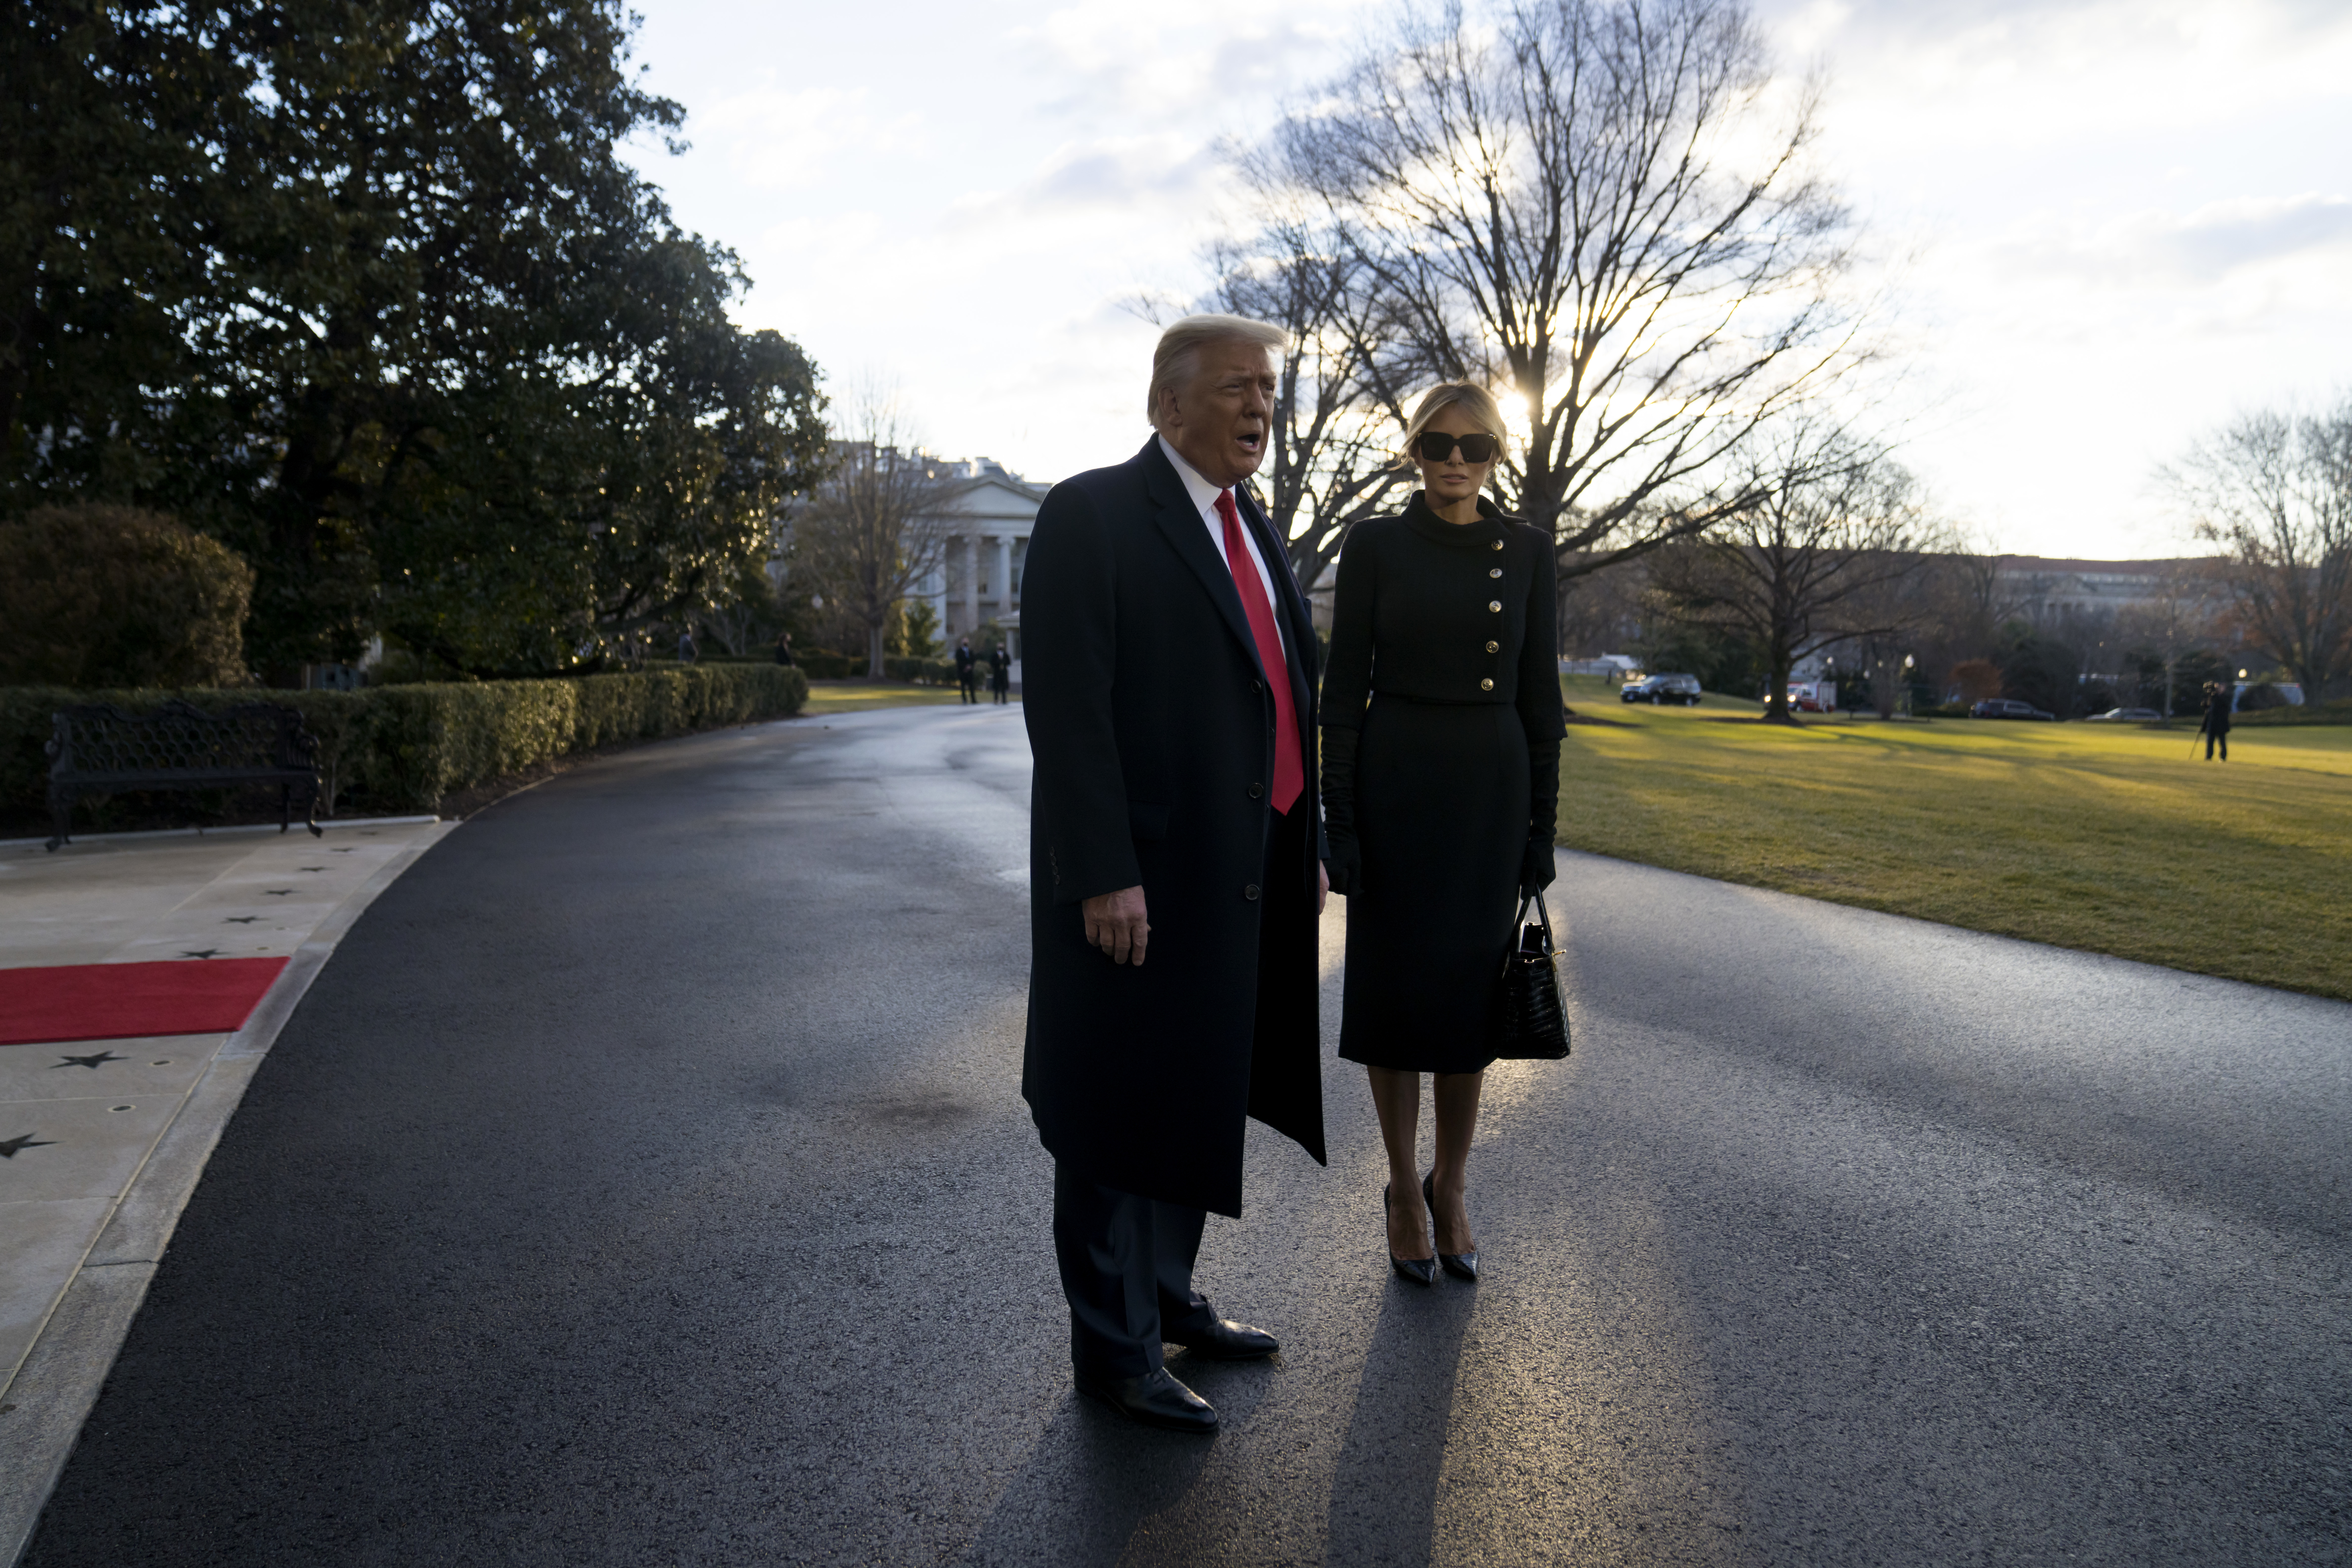 WASHINGTON, DC - JANUARY 20: President Donald Trump and first lady Melania Trump prepare to depart the White House on January 20, 2021 in Washington, DC. (Eric Thayer/Getty Images)